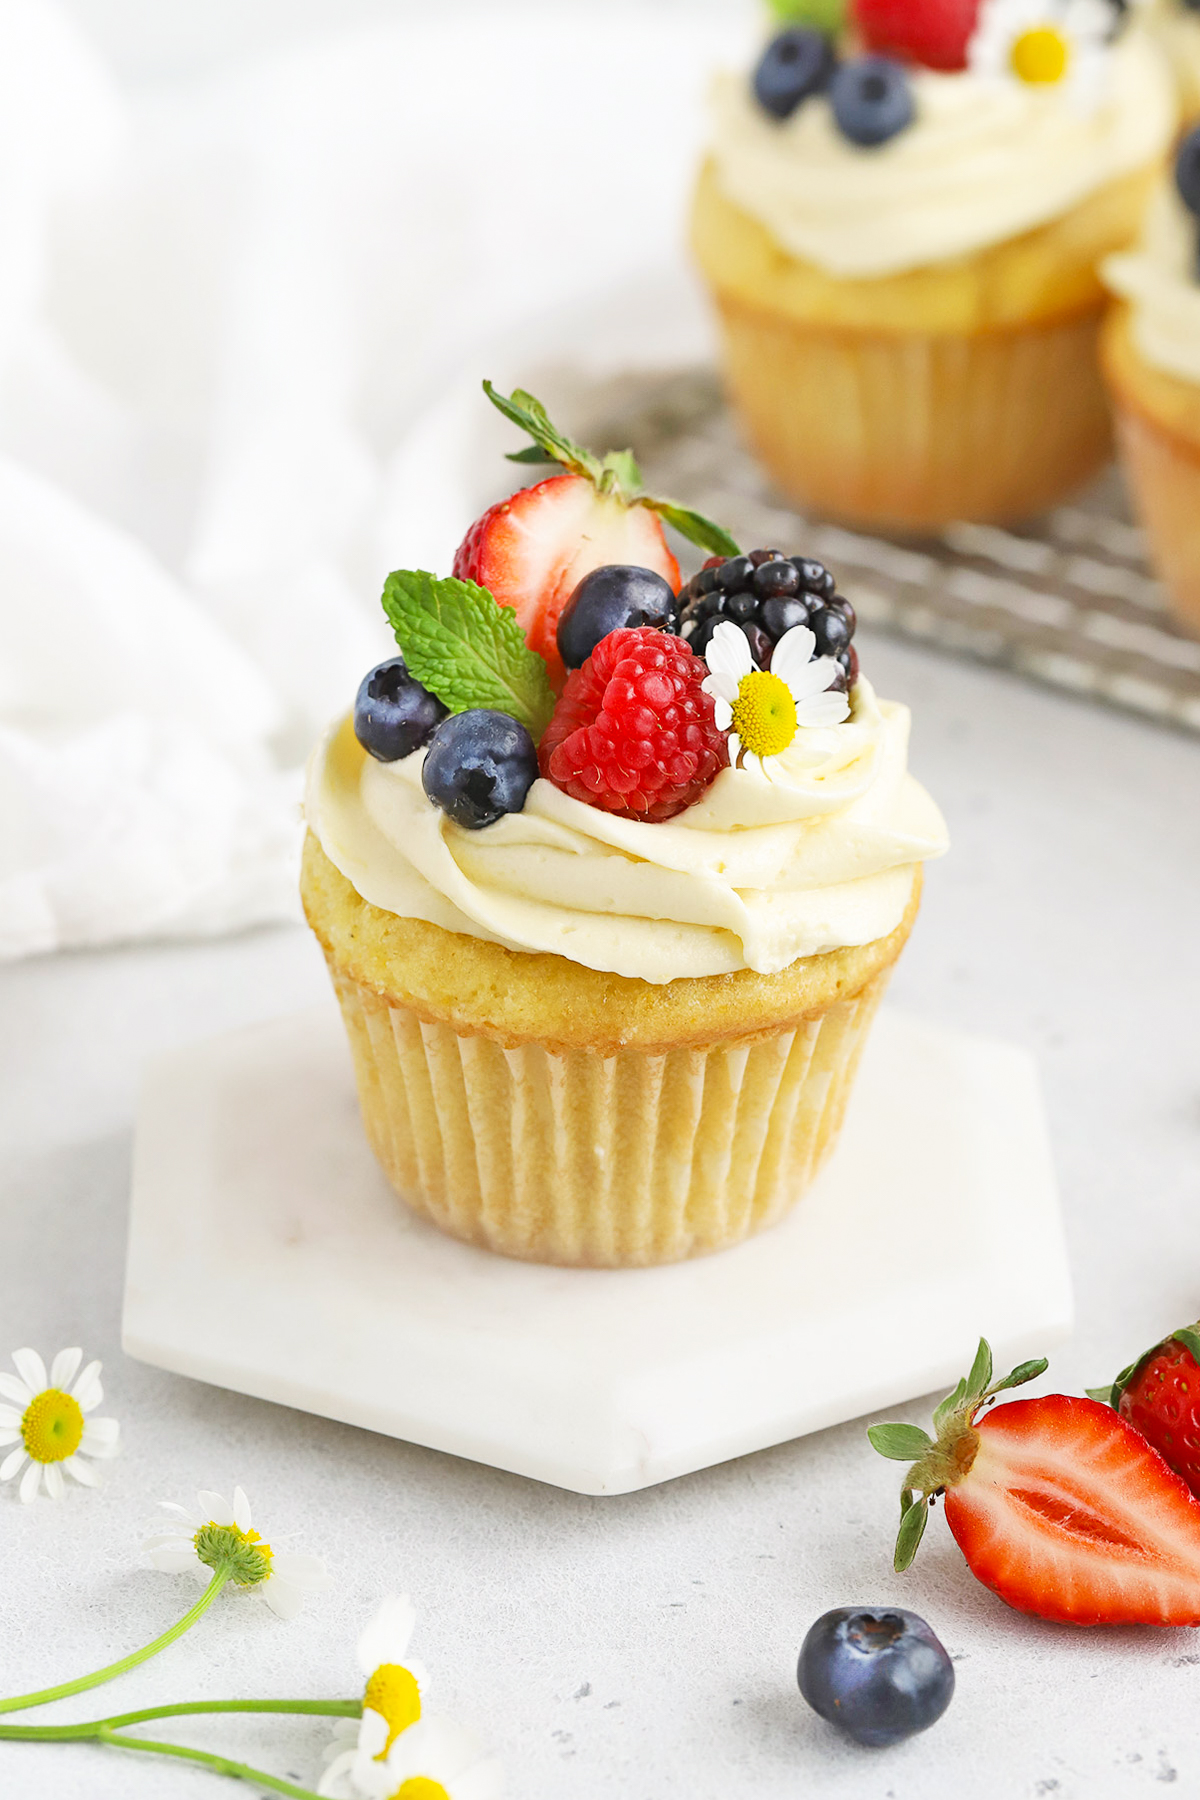 Front view of a gluten-free lemon cupcake with lemon frosting, fresh berries, and edible flowers on a white background